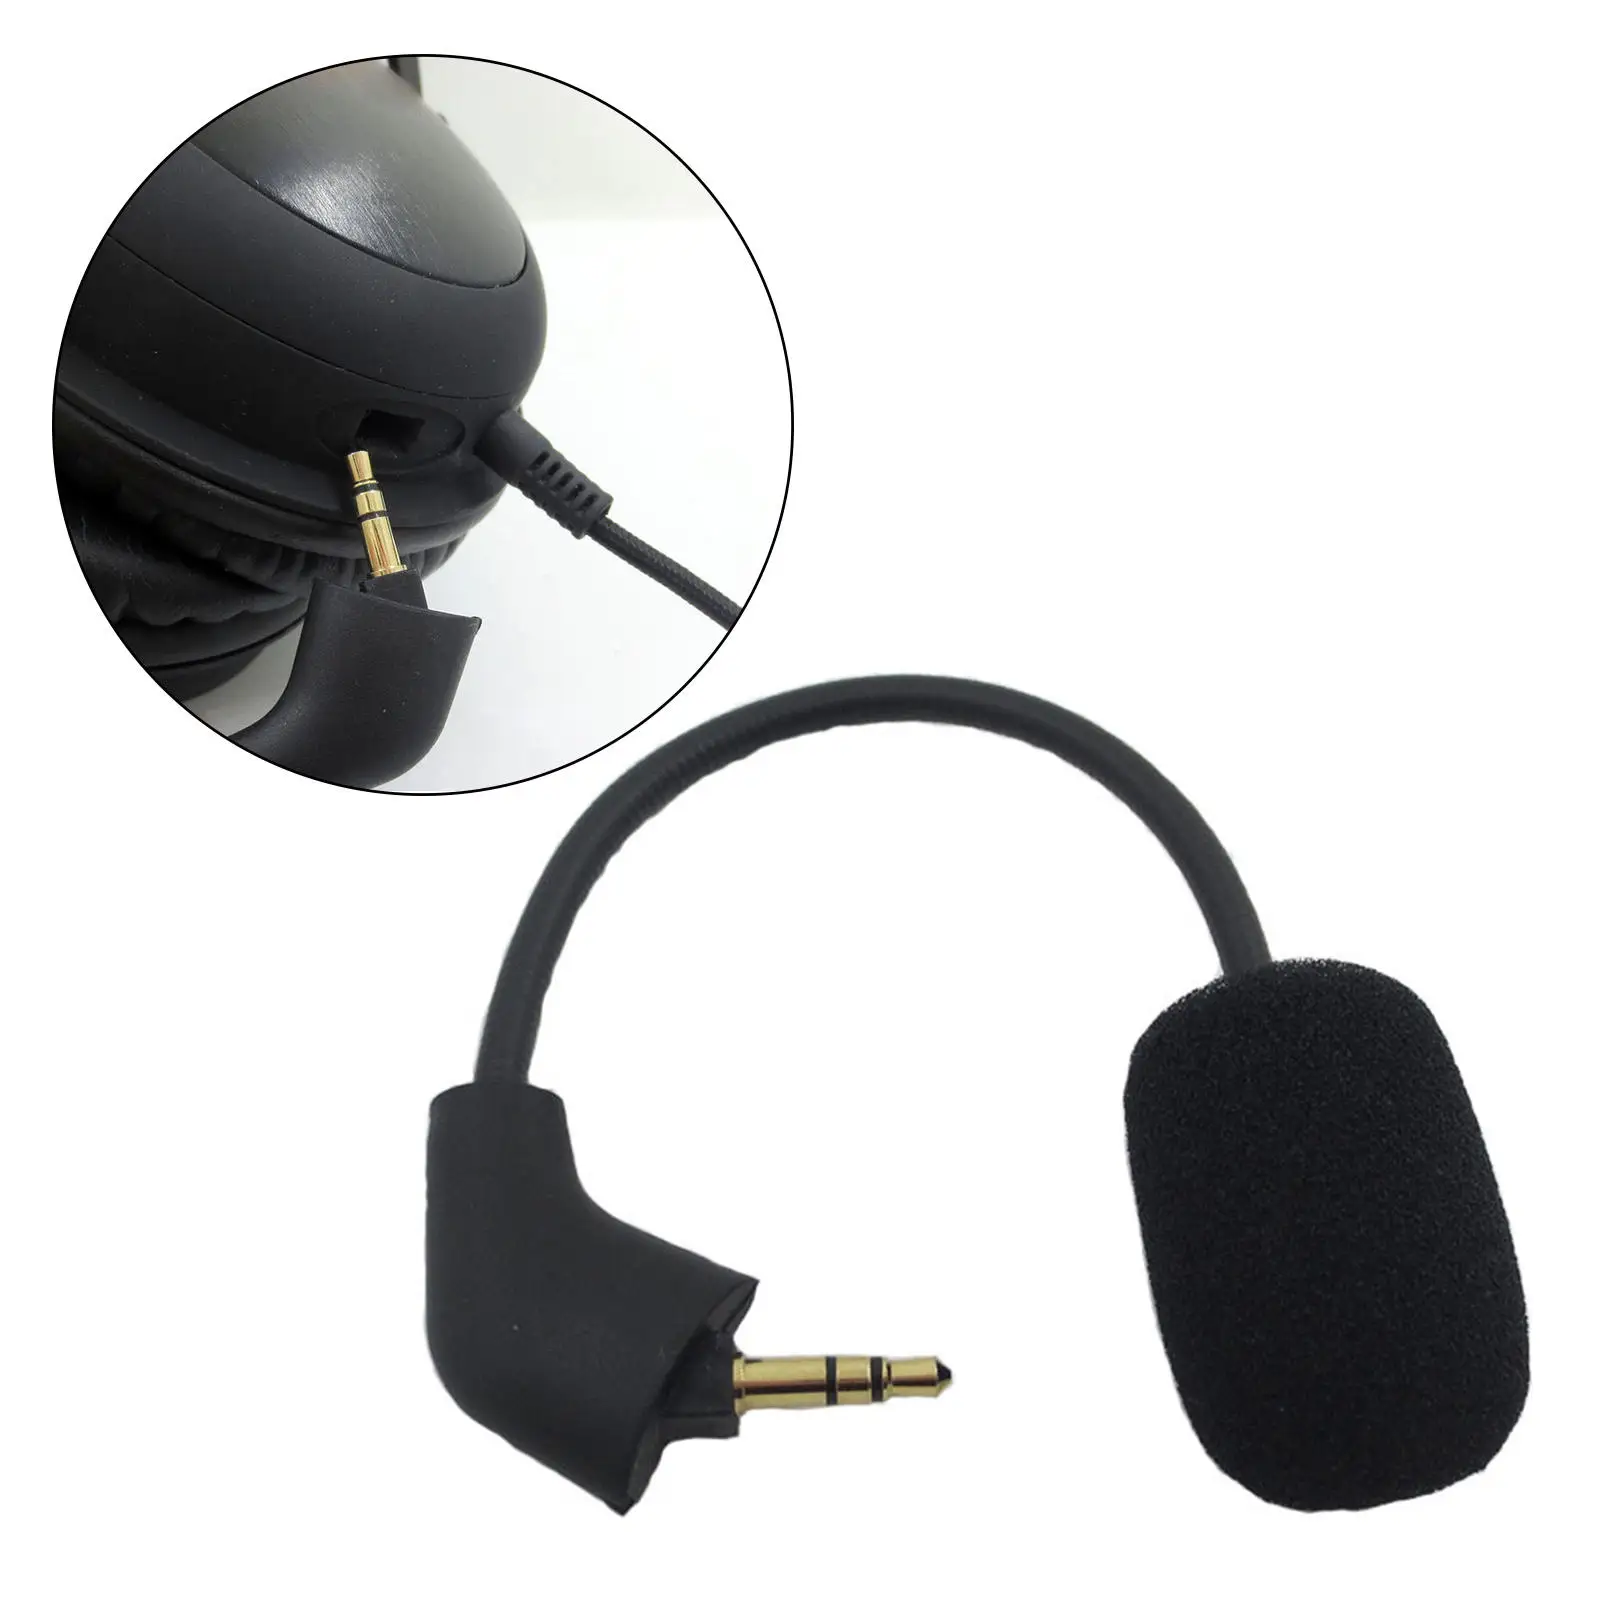 Game Mic Replacement Detachable Noise Cancelling Easy Pickup Voice Oxygen-Free Copper Plug in for Hyperx Cloud II